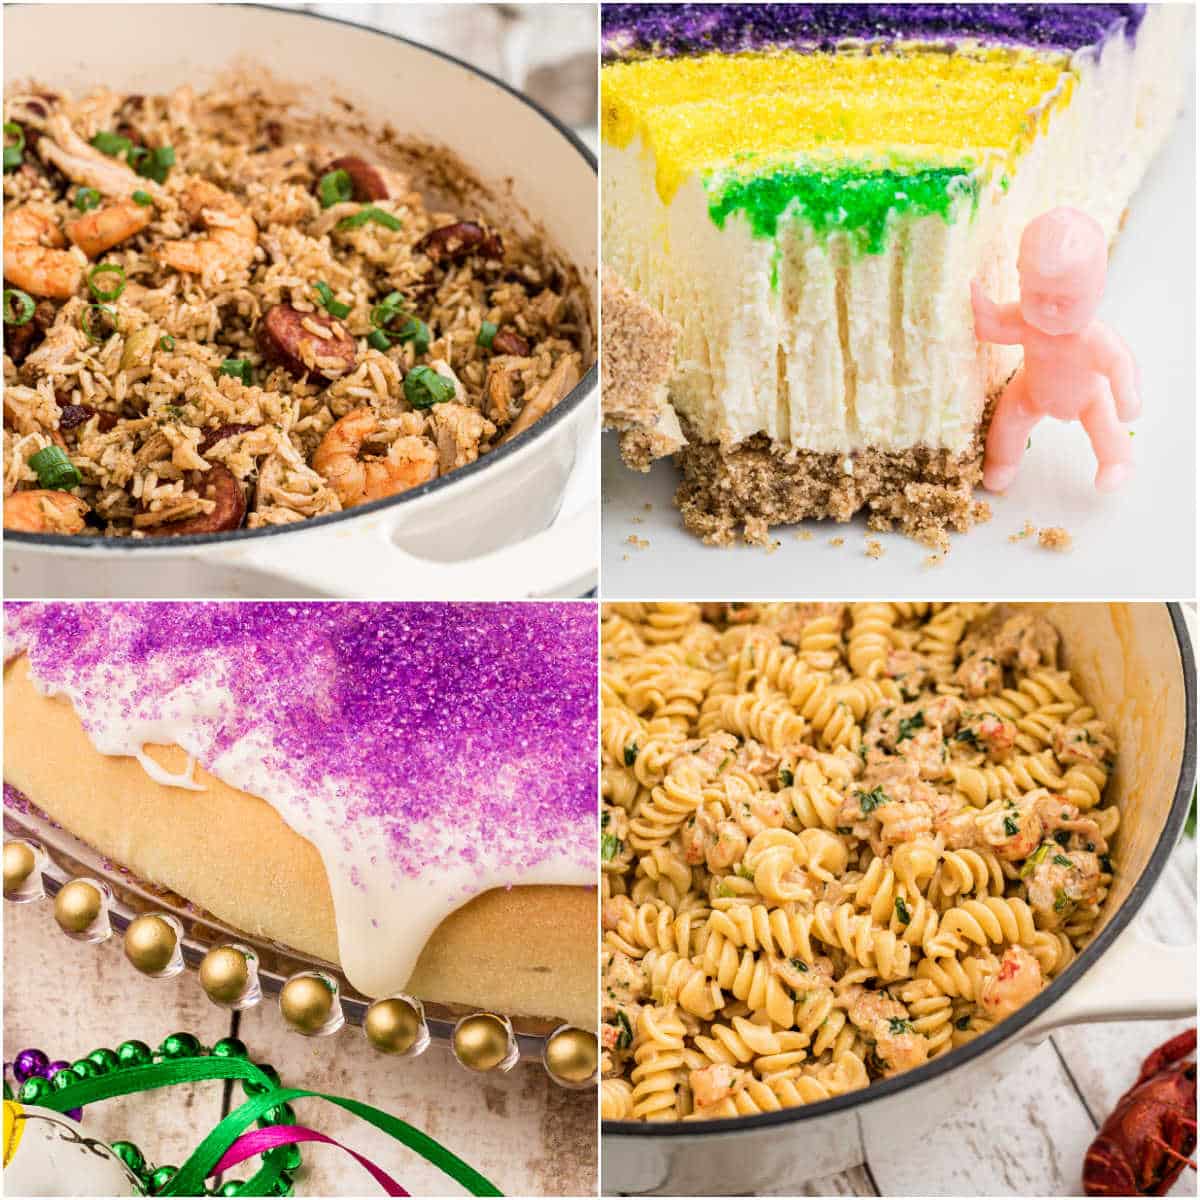 A collage of four images showing classic food ideas for mardi gras.